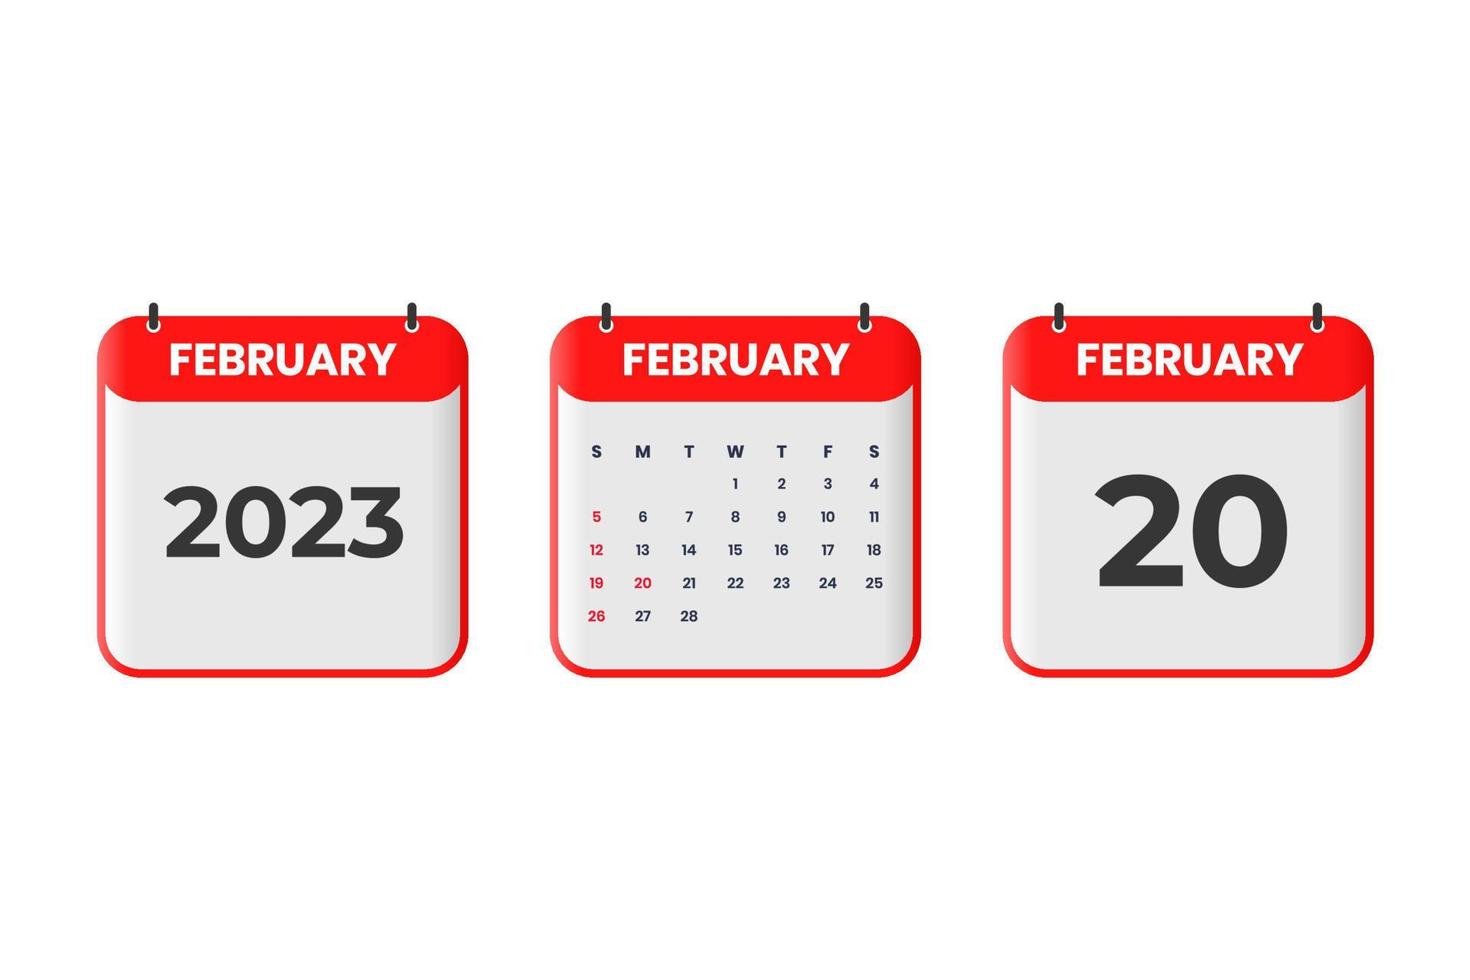 February 2023 calendar design. 20th February 2023 calendar icon for schedule, appointment, important date concept vector